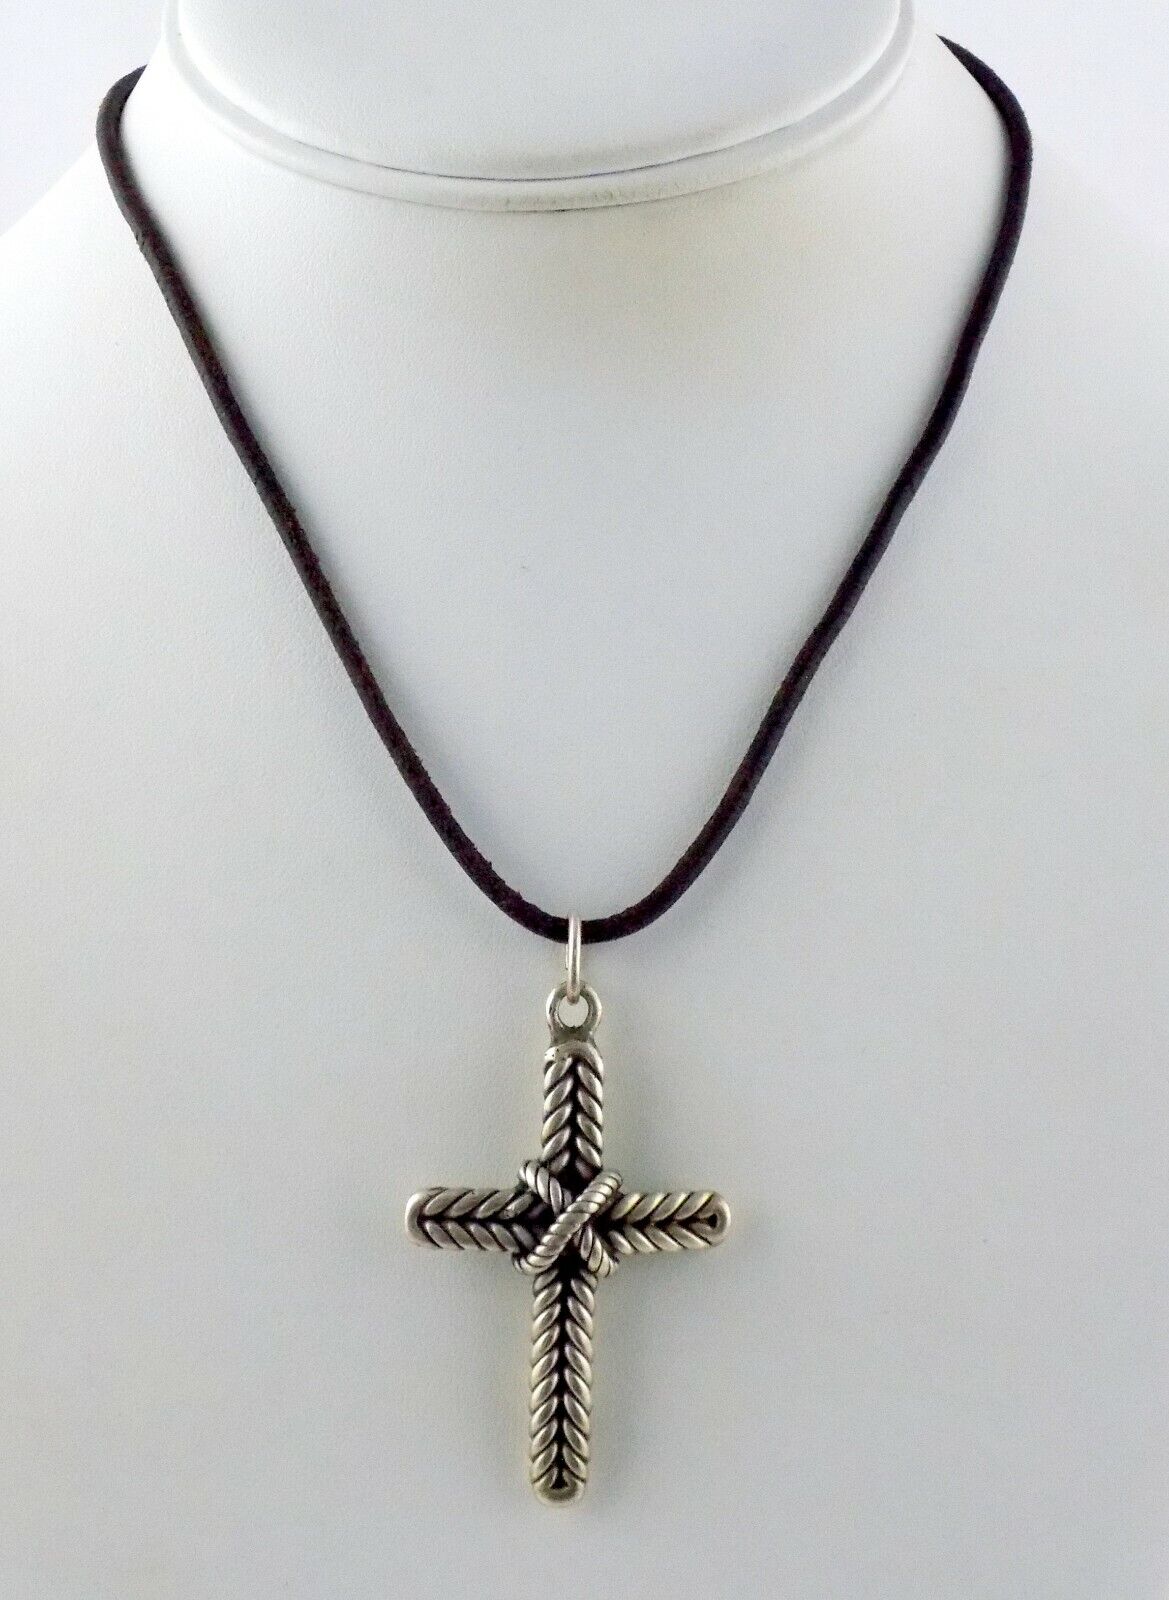 Sterling Silver Clasp Black Cord Necklace with Cross Pendant Marked \